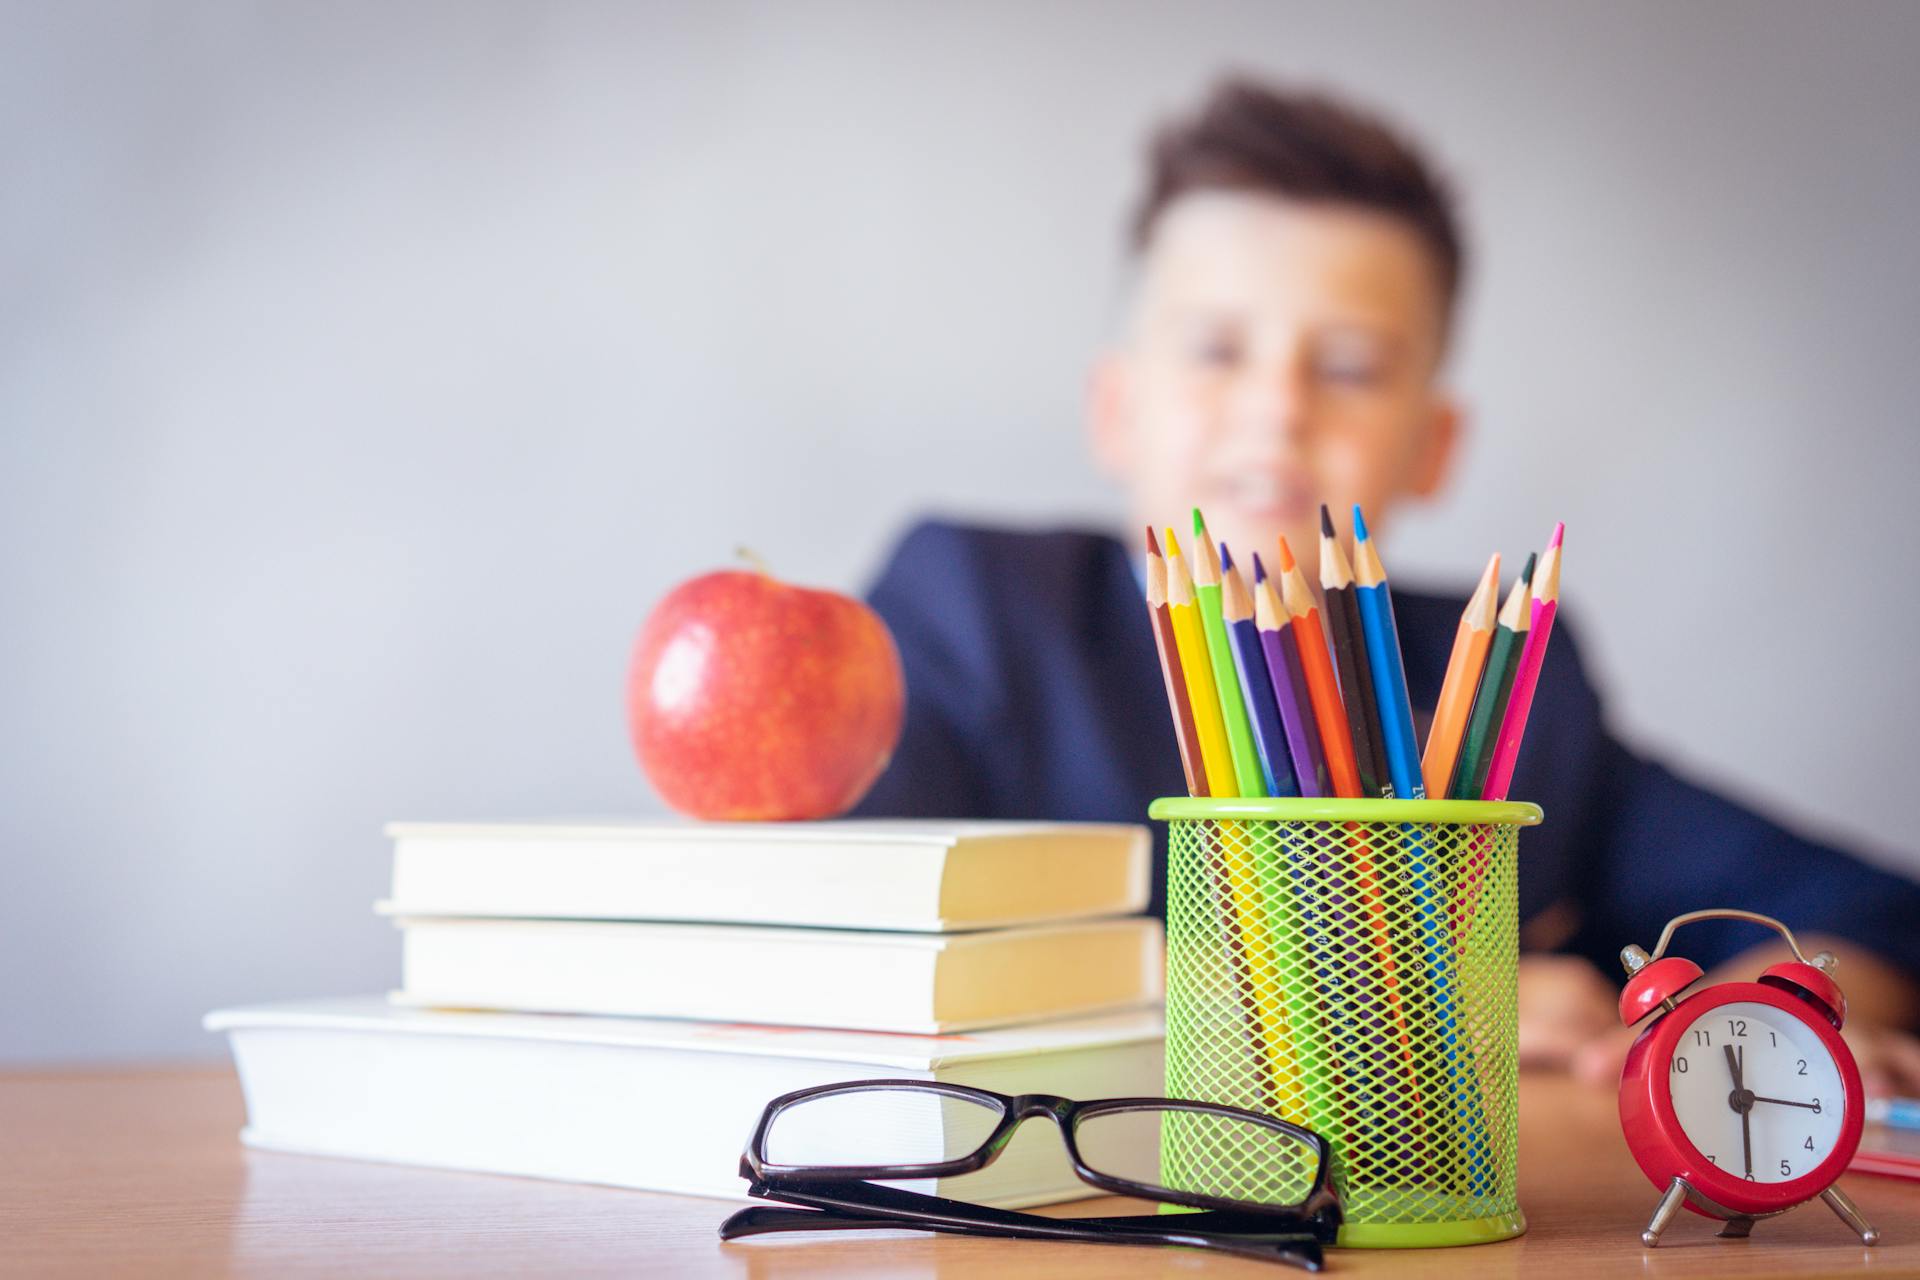 Books, pencils, apple in foreground; blurred child in background.